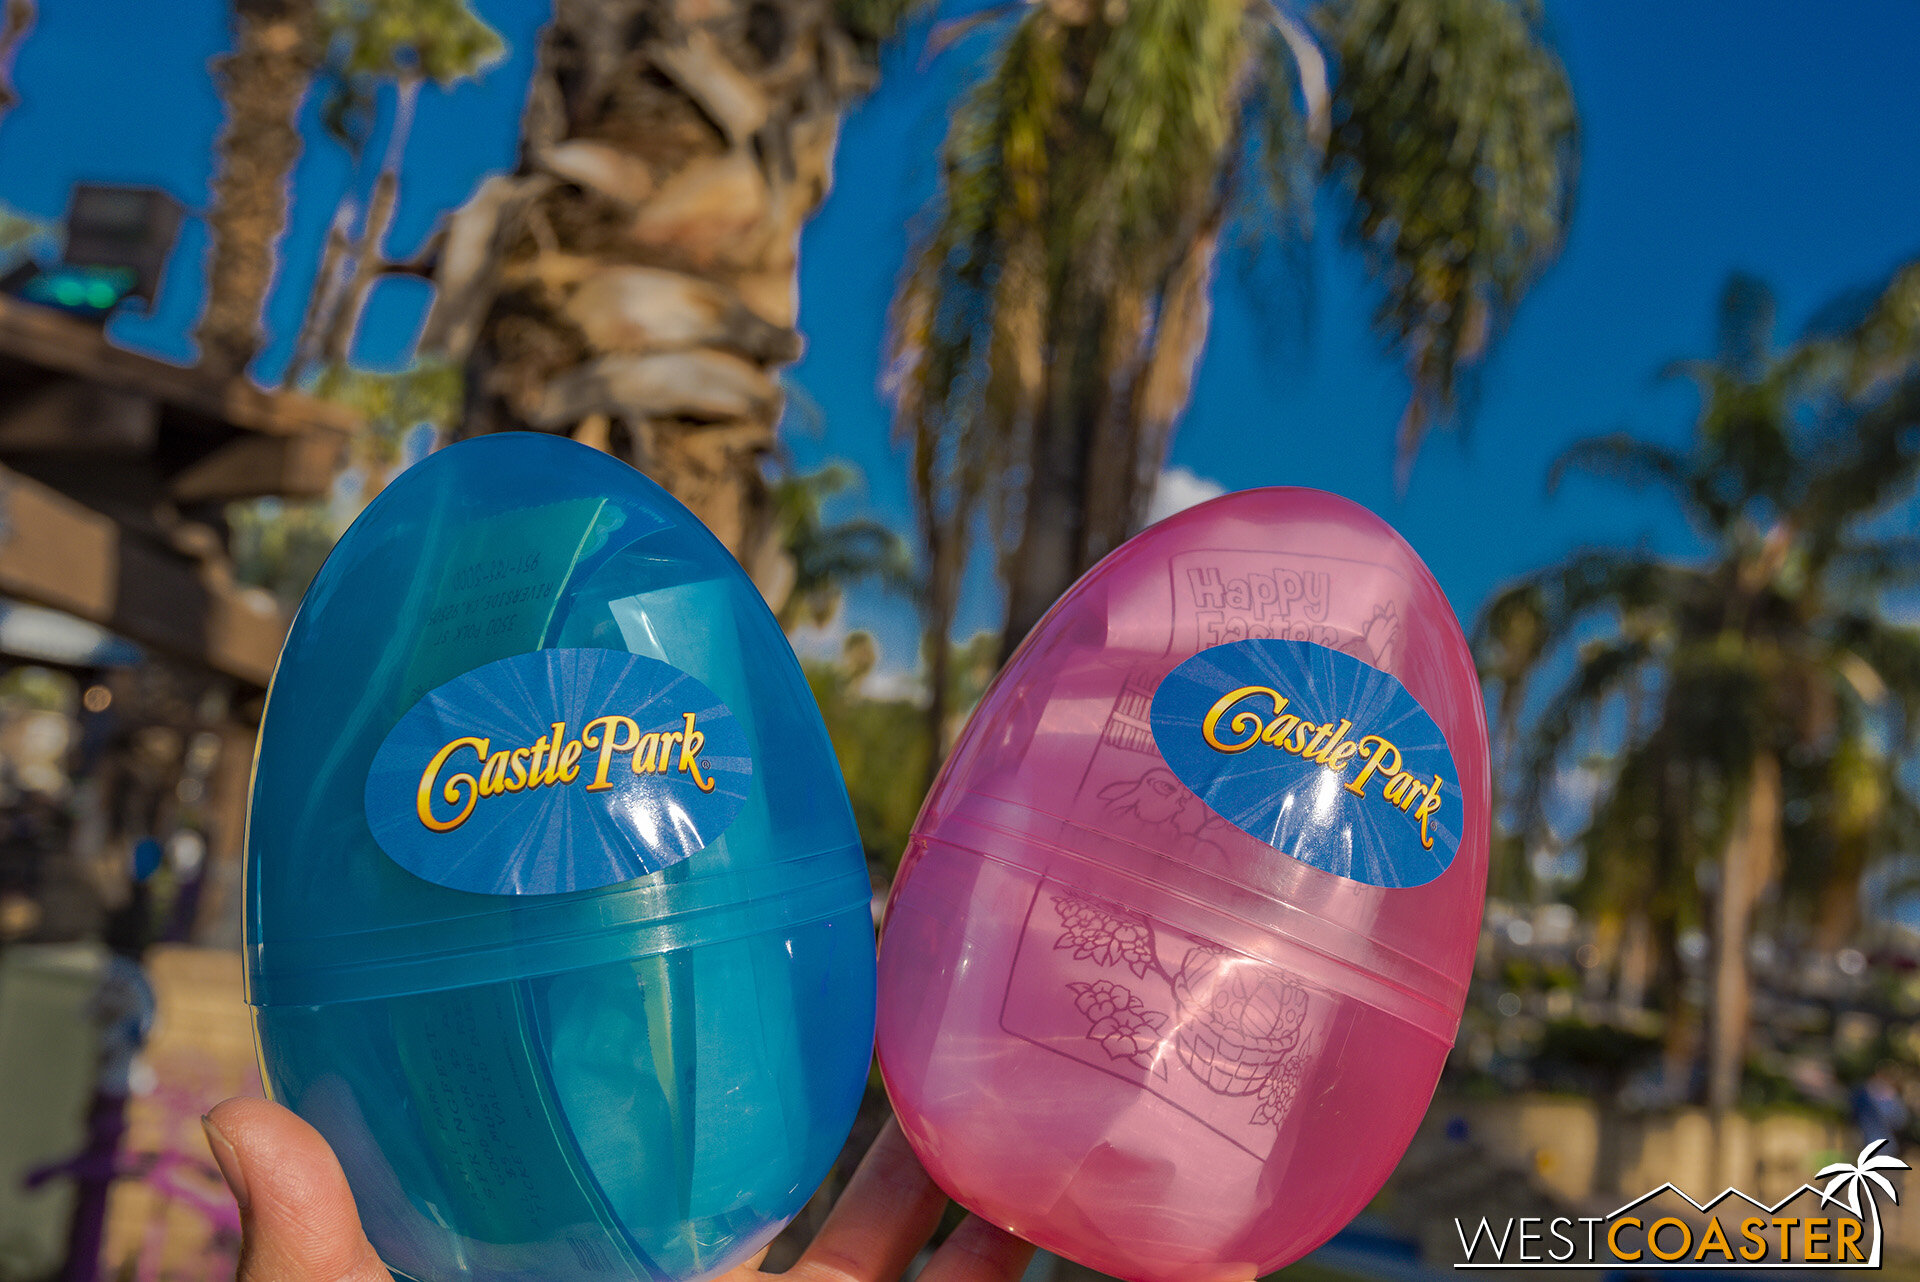  Everything that comes a part of Springfest is contained in these oversized Easter eggs—other than the miniature golf wristband, which is passed out in conjunction. 